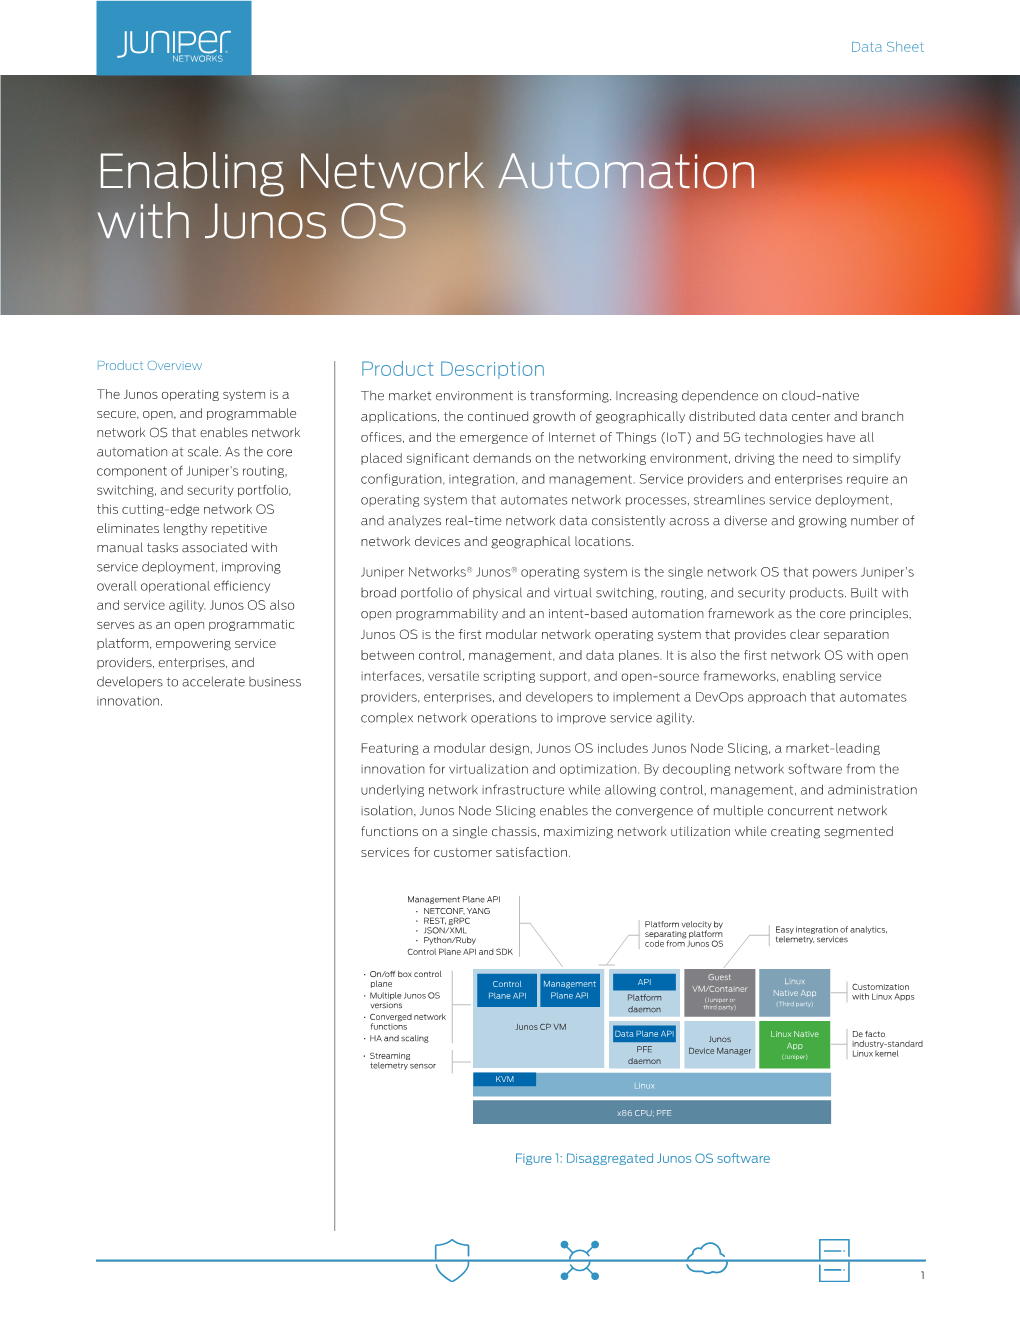 Enabling Network Automation with Junos OS | Juniper Networks